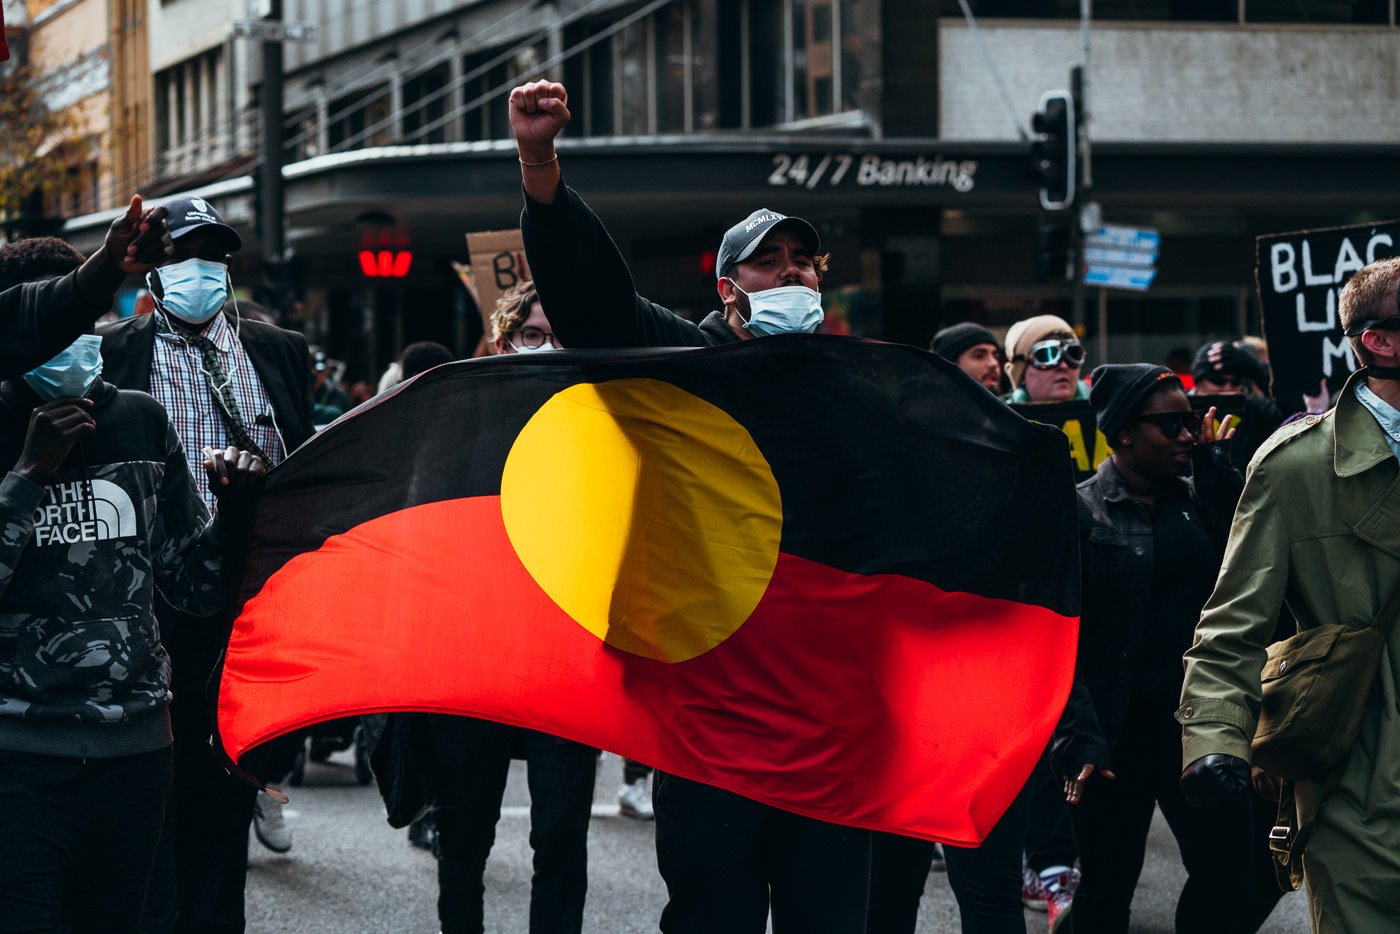 THE WEEKLY #204: BLACK LIVES MATTER RALLY ADELAIDE